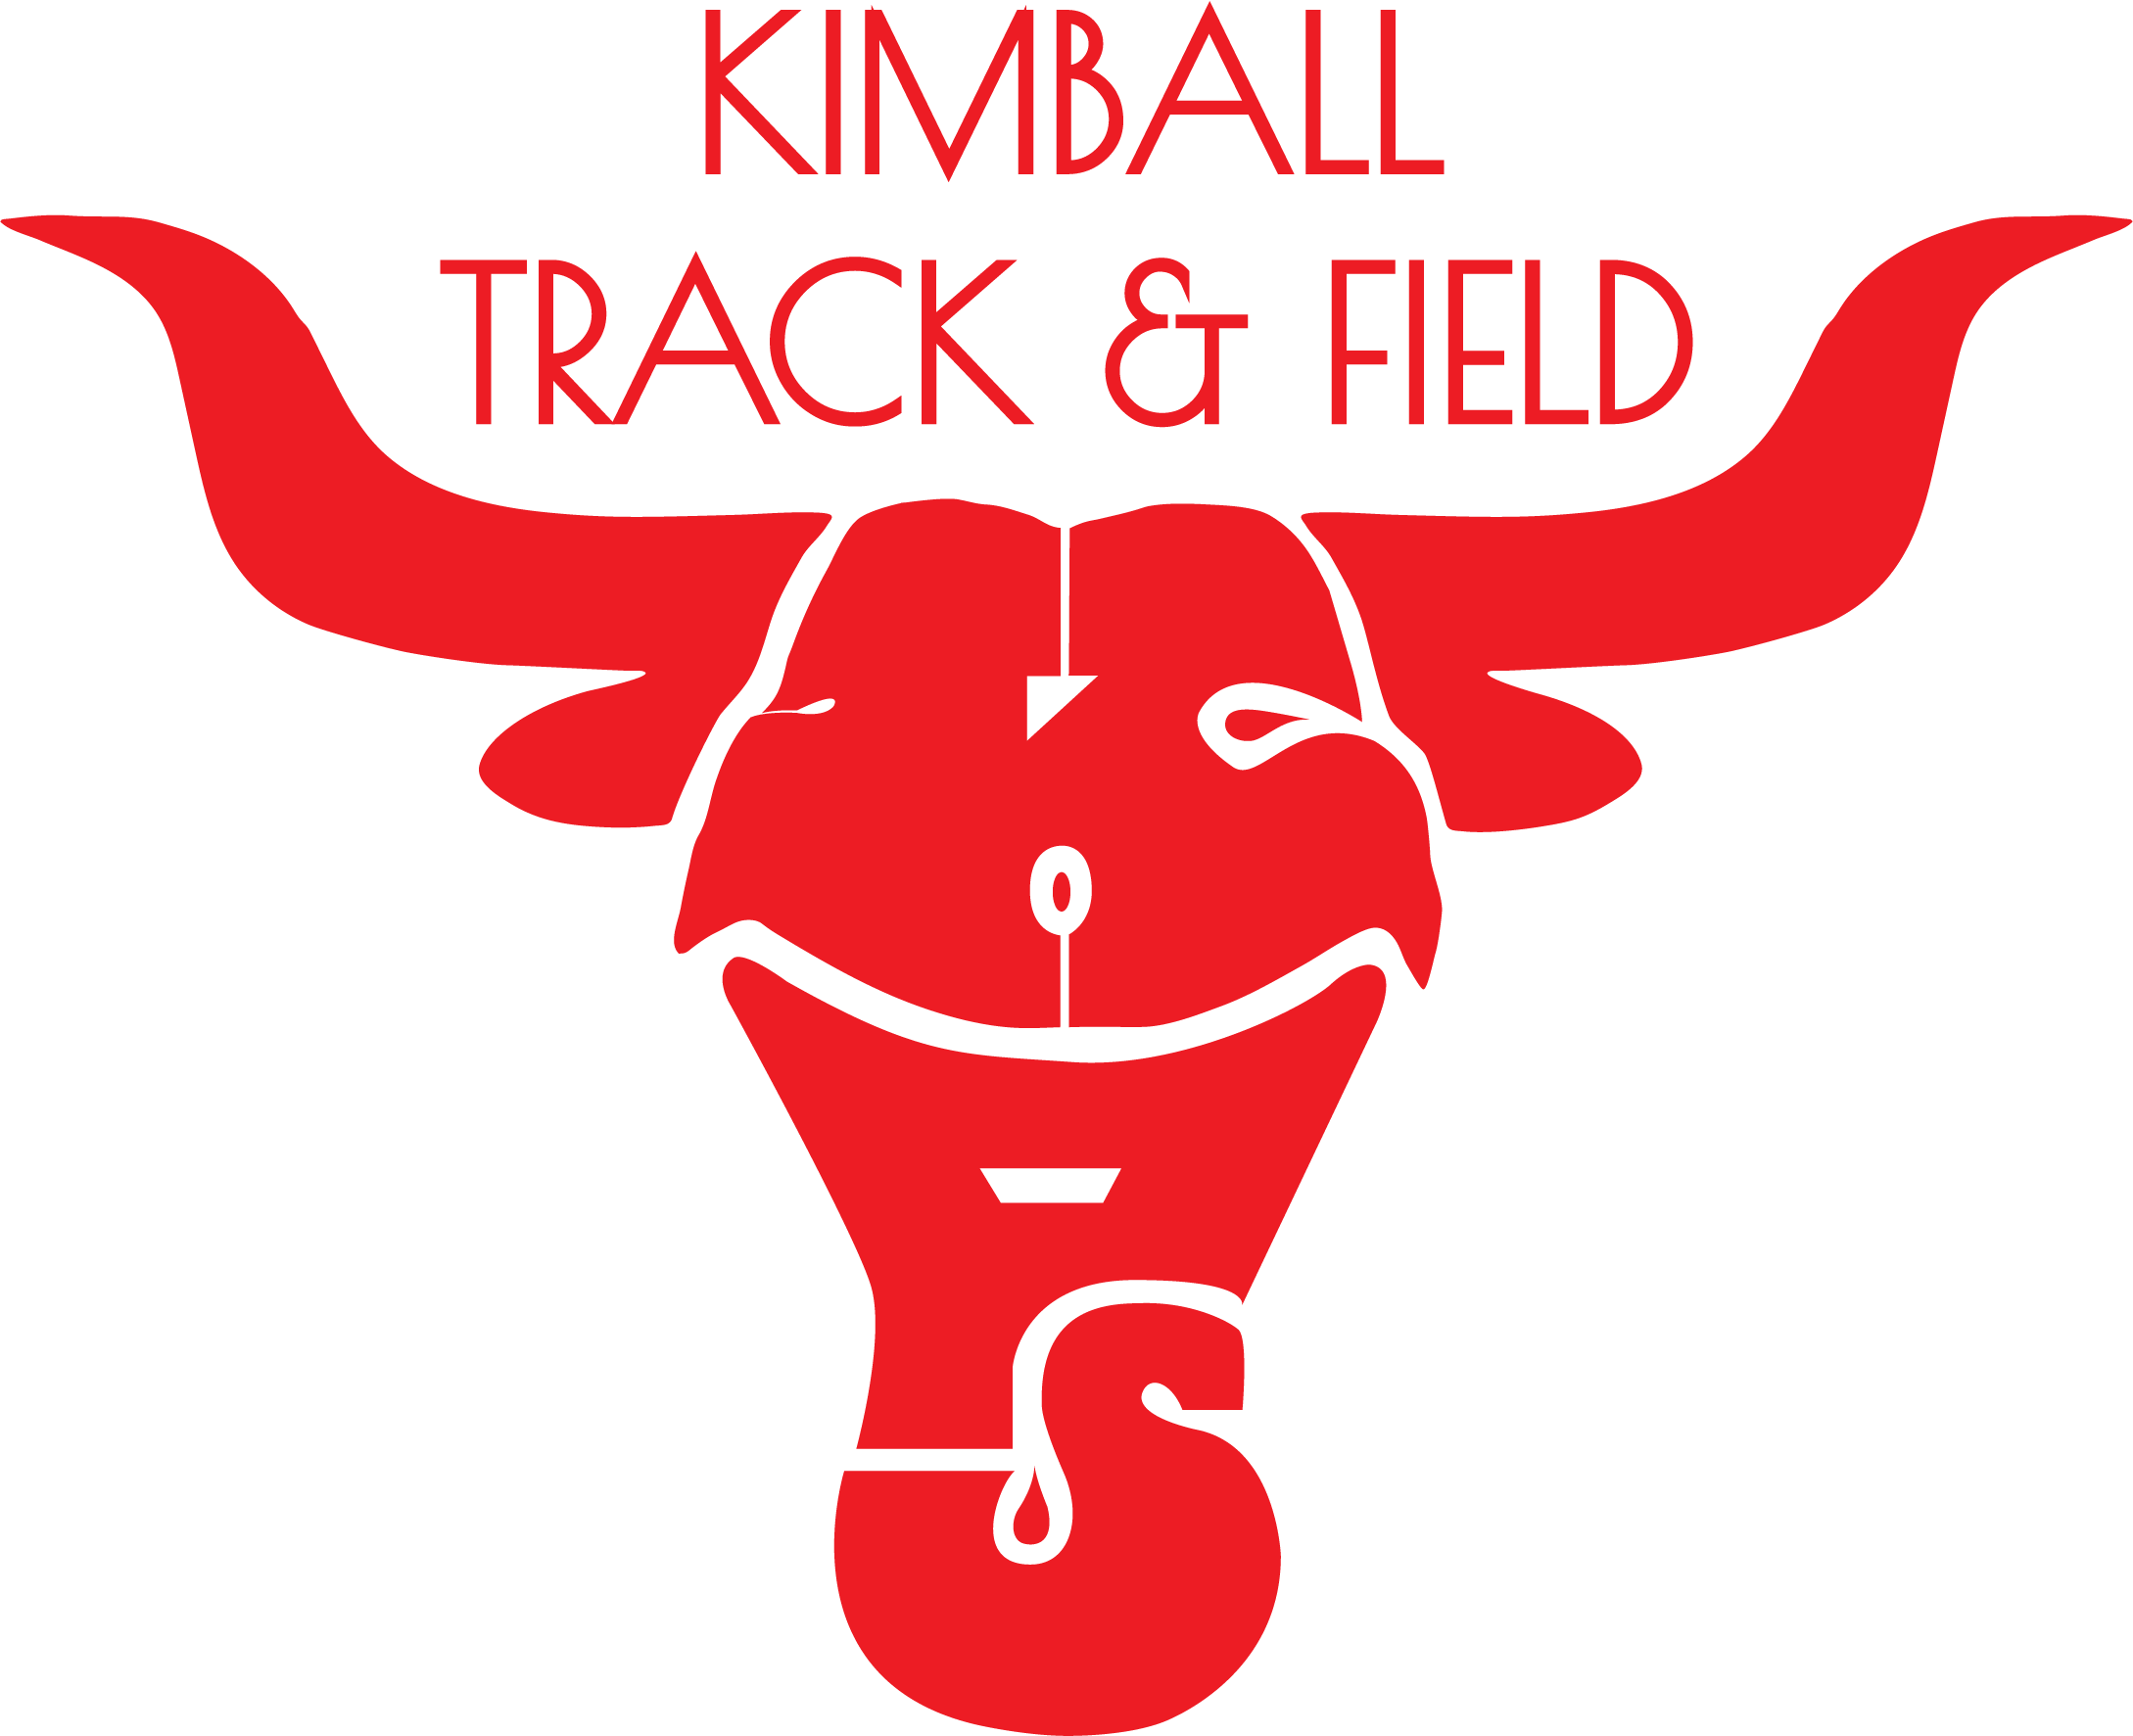 Kimball Track and Field 21